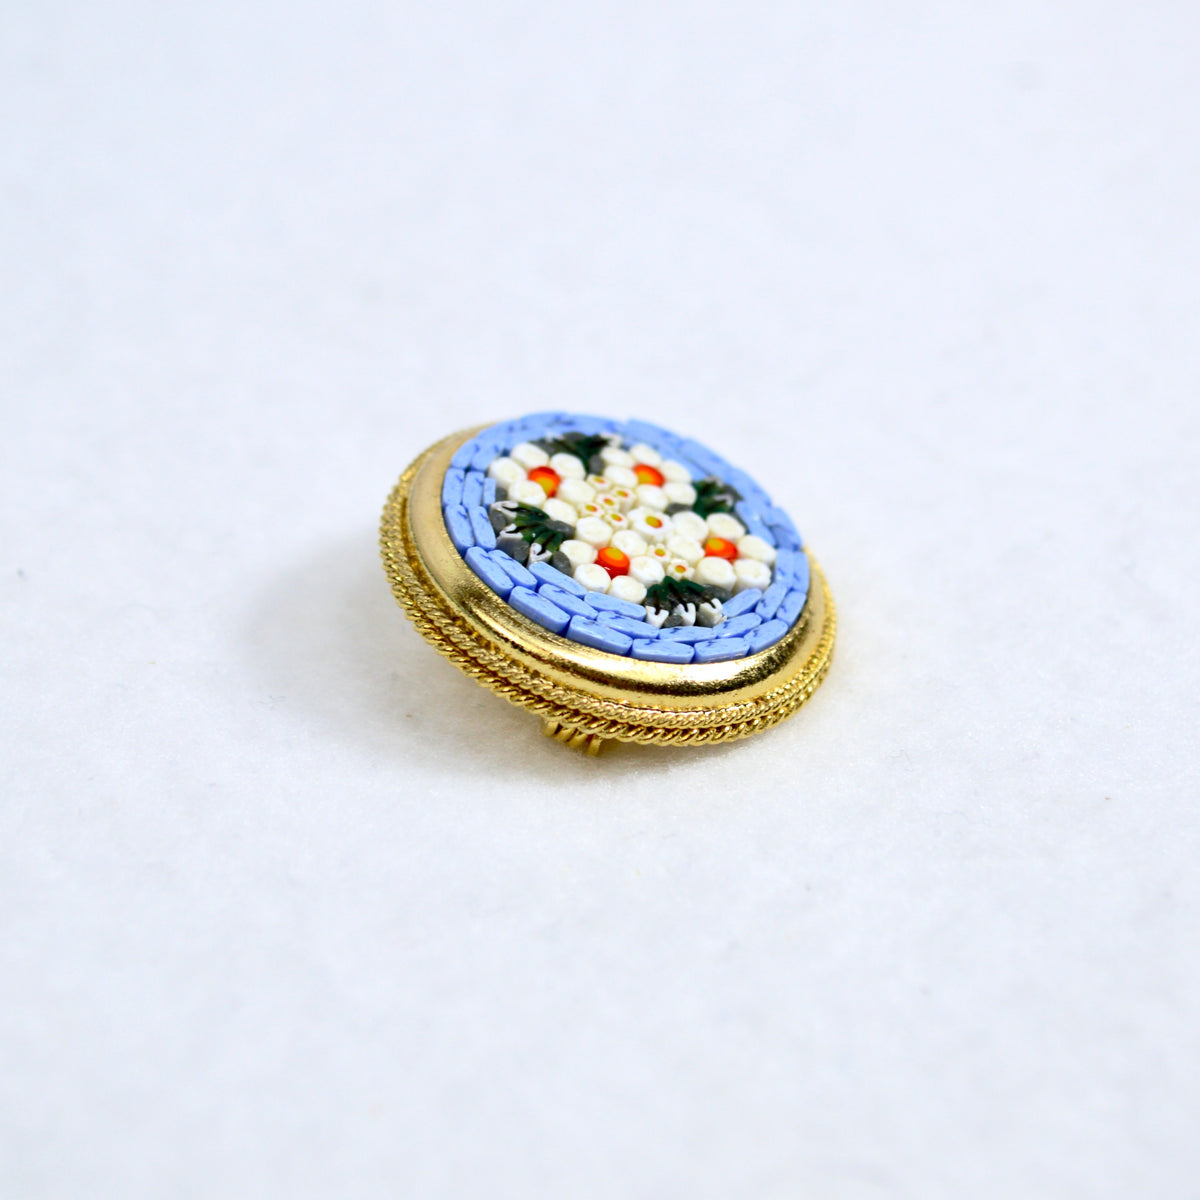 Florentine Mosaic Round Brooch, Lapel Pin, Made in Italy - My Italian Decor